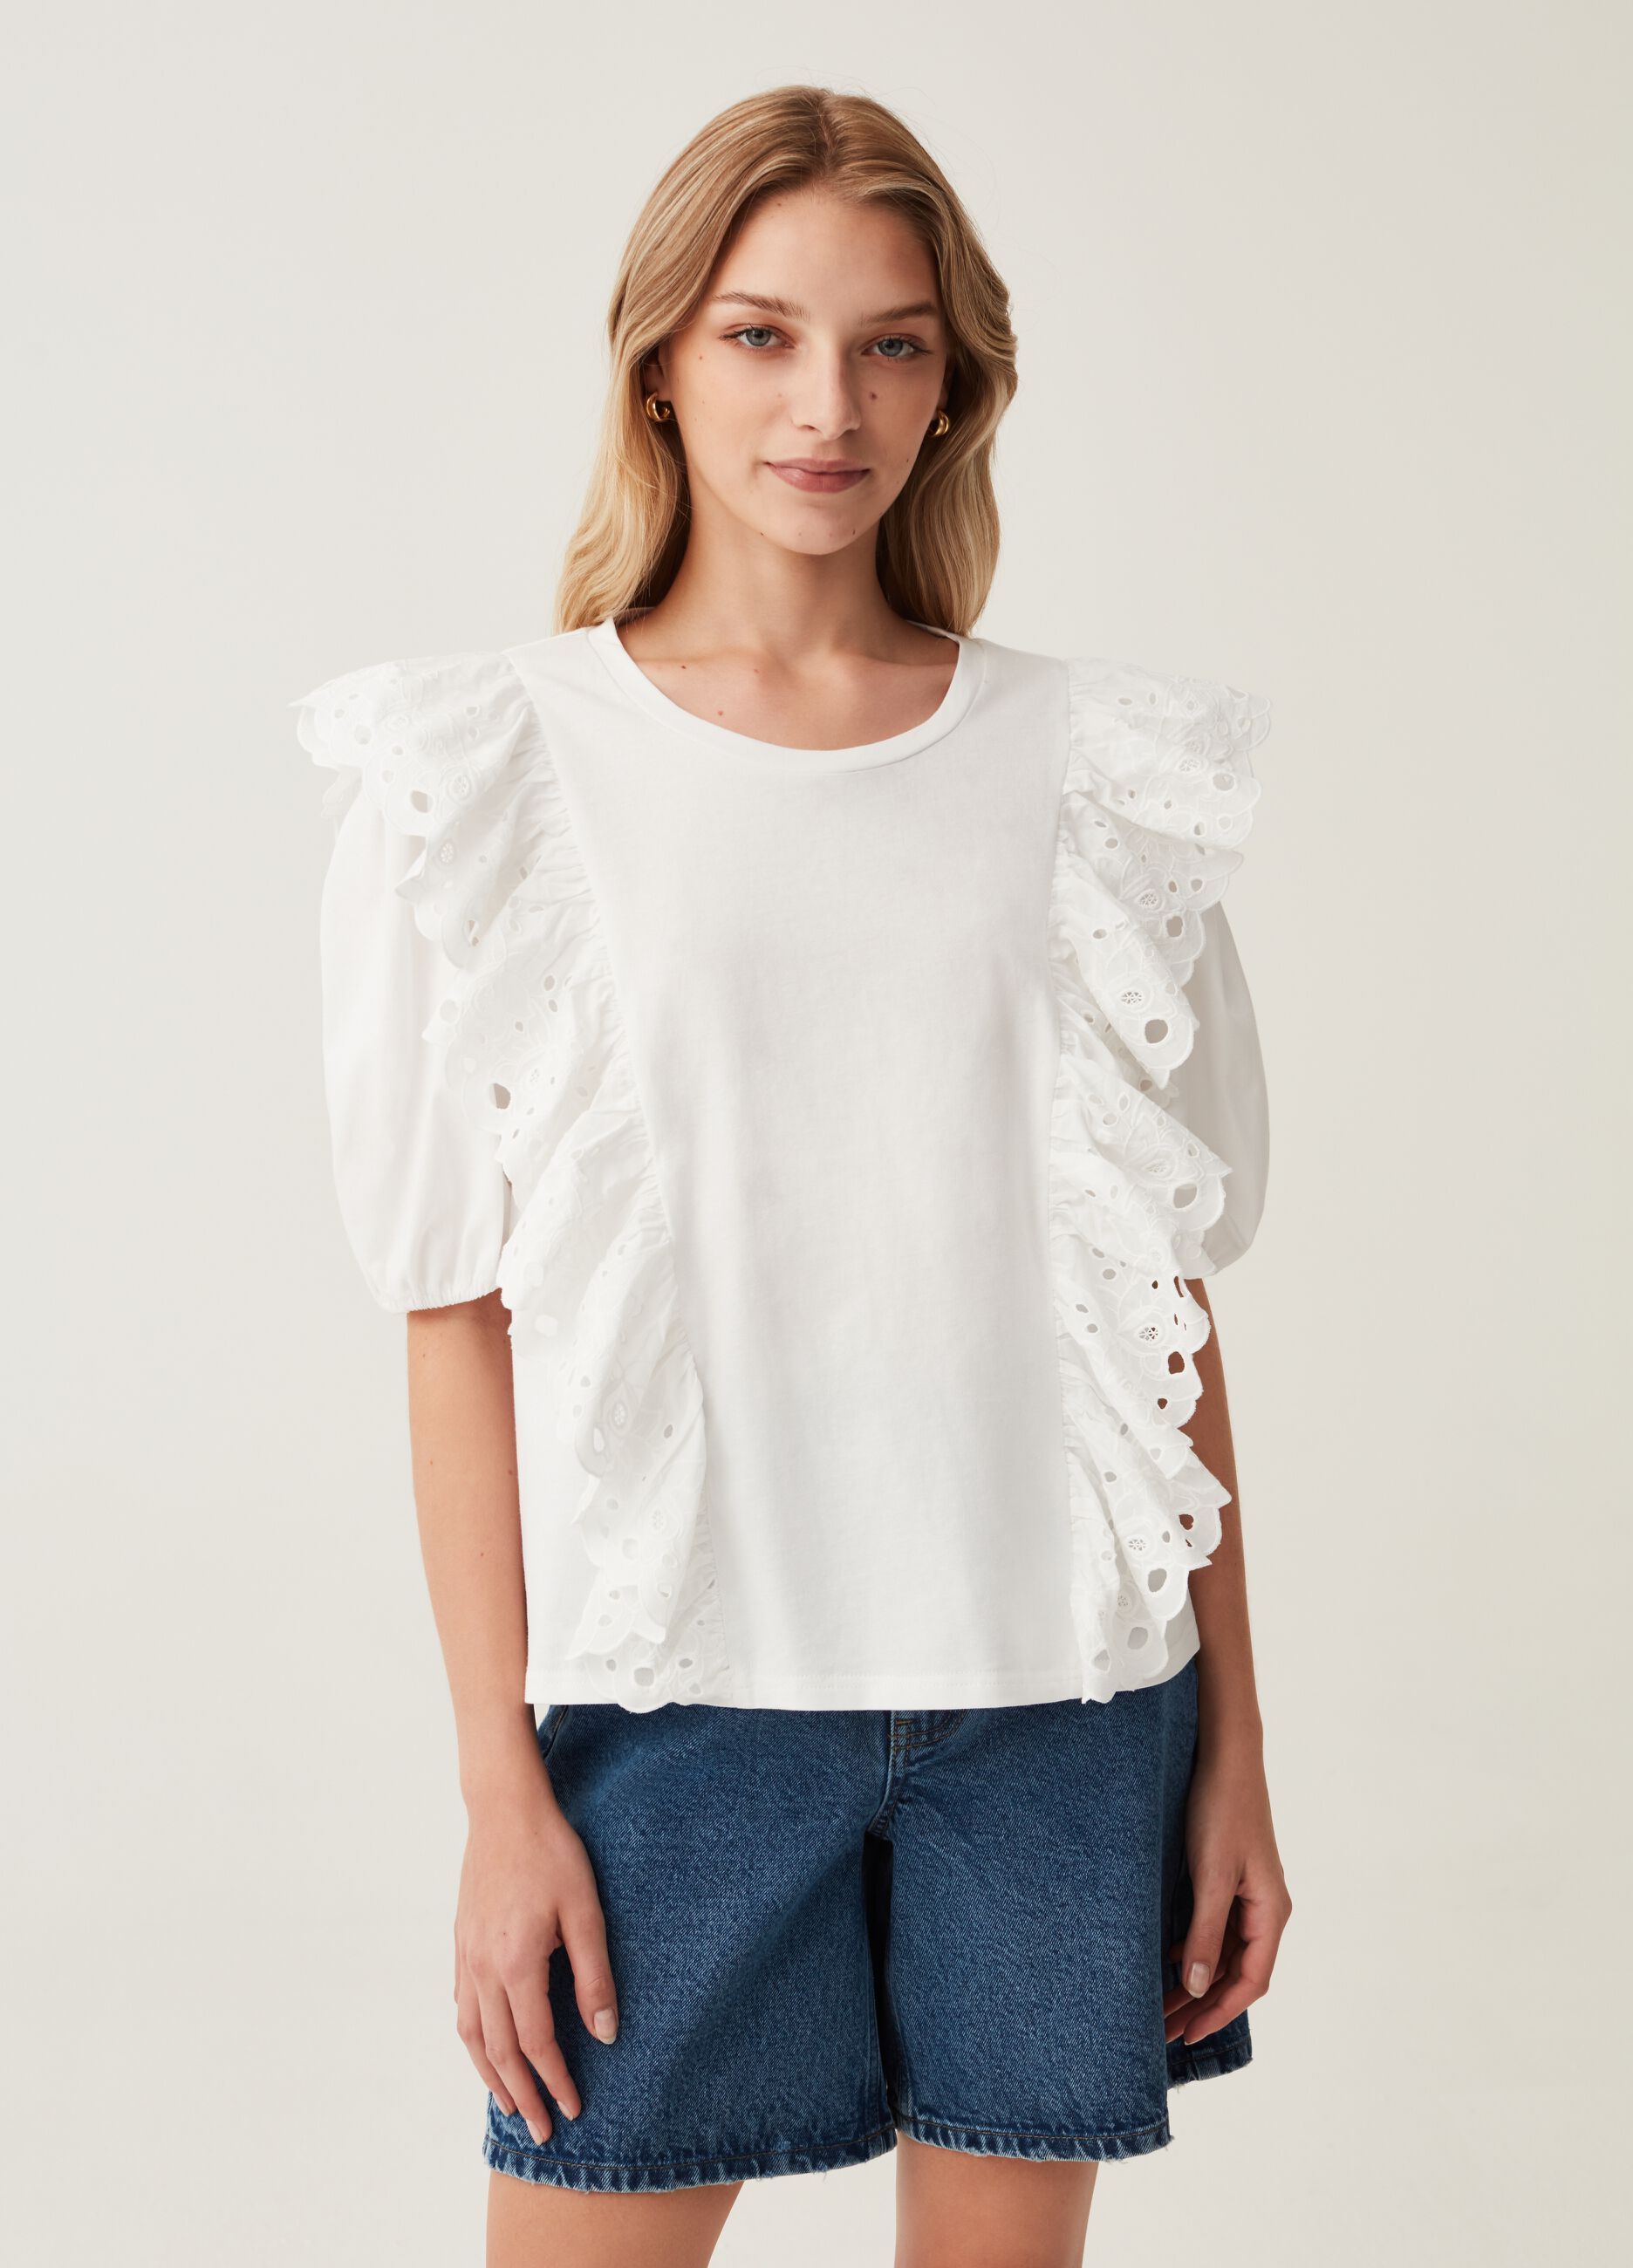 T-shirt with broderie anglaise lace frills